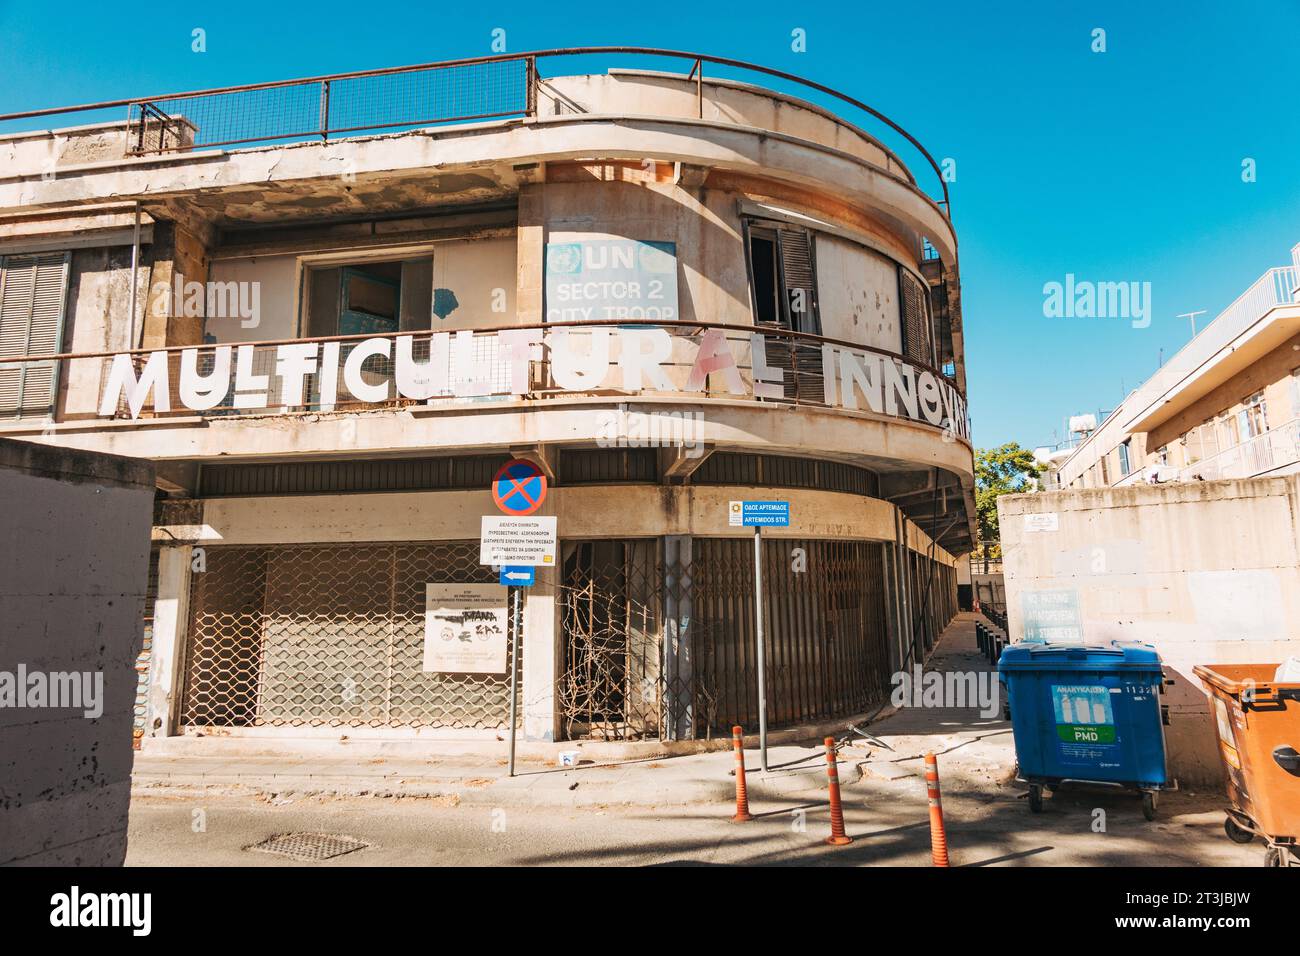 an abandoned corner store in south Nicosia. A UN Sector 2 City Troop sign is visible on the top storey Stock Photo